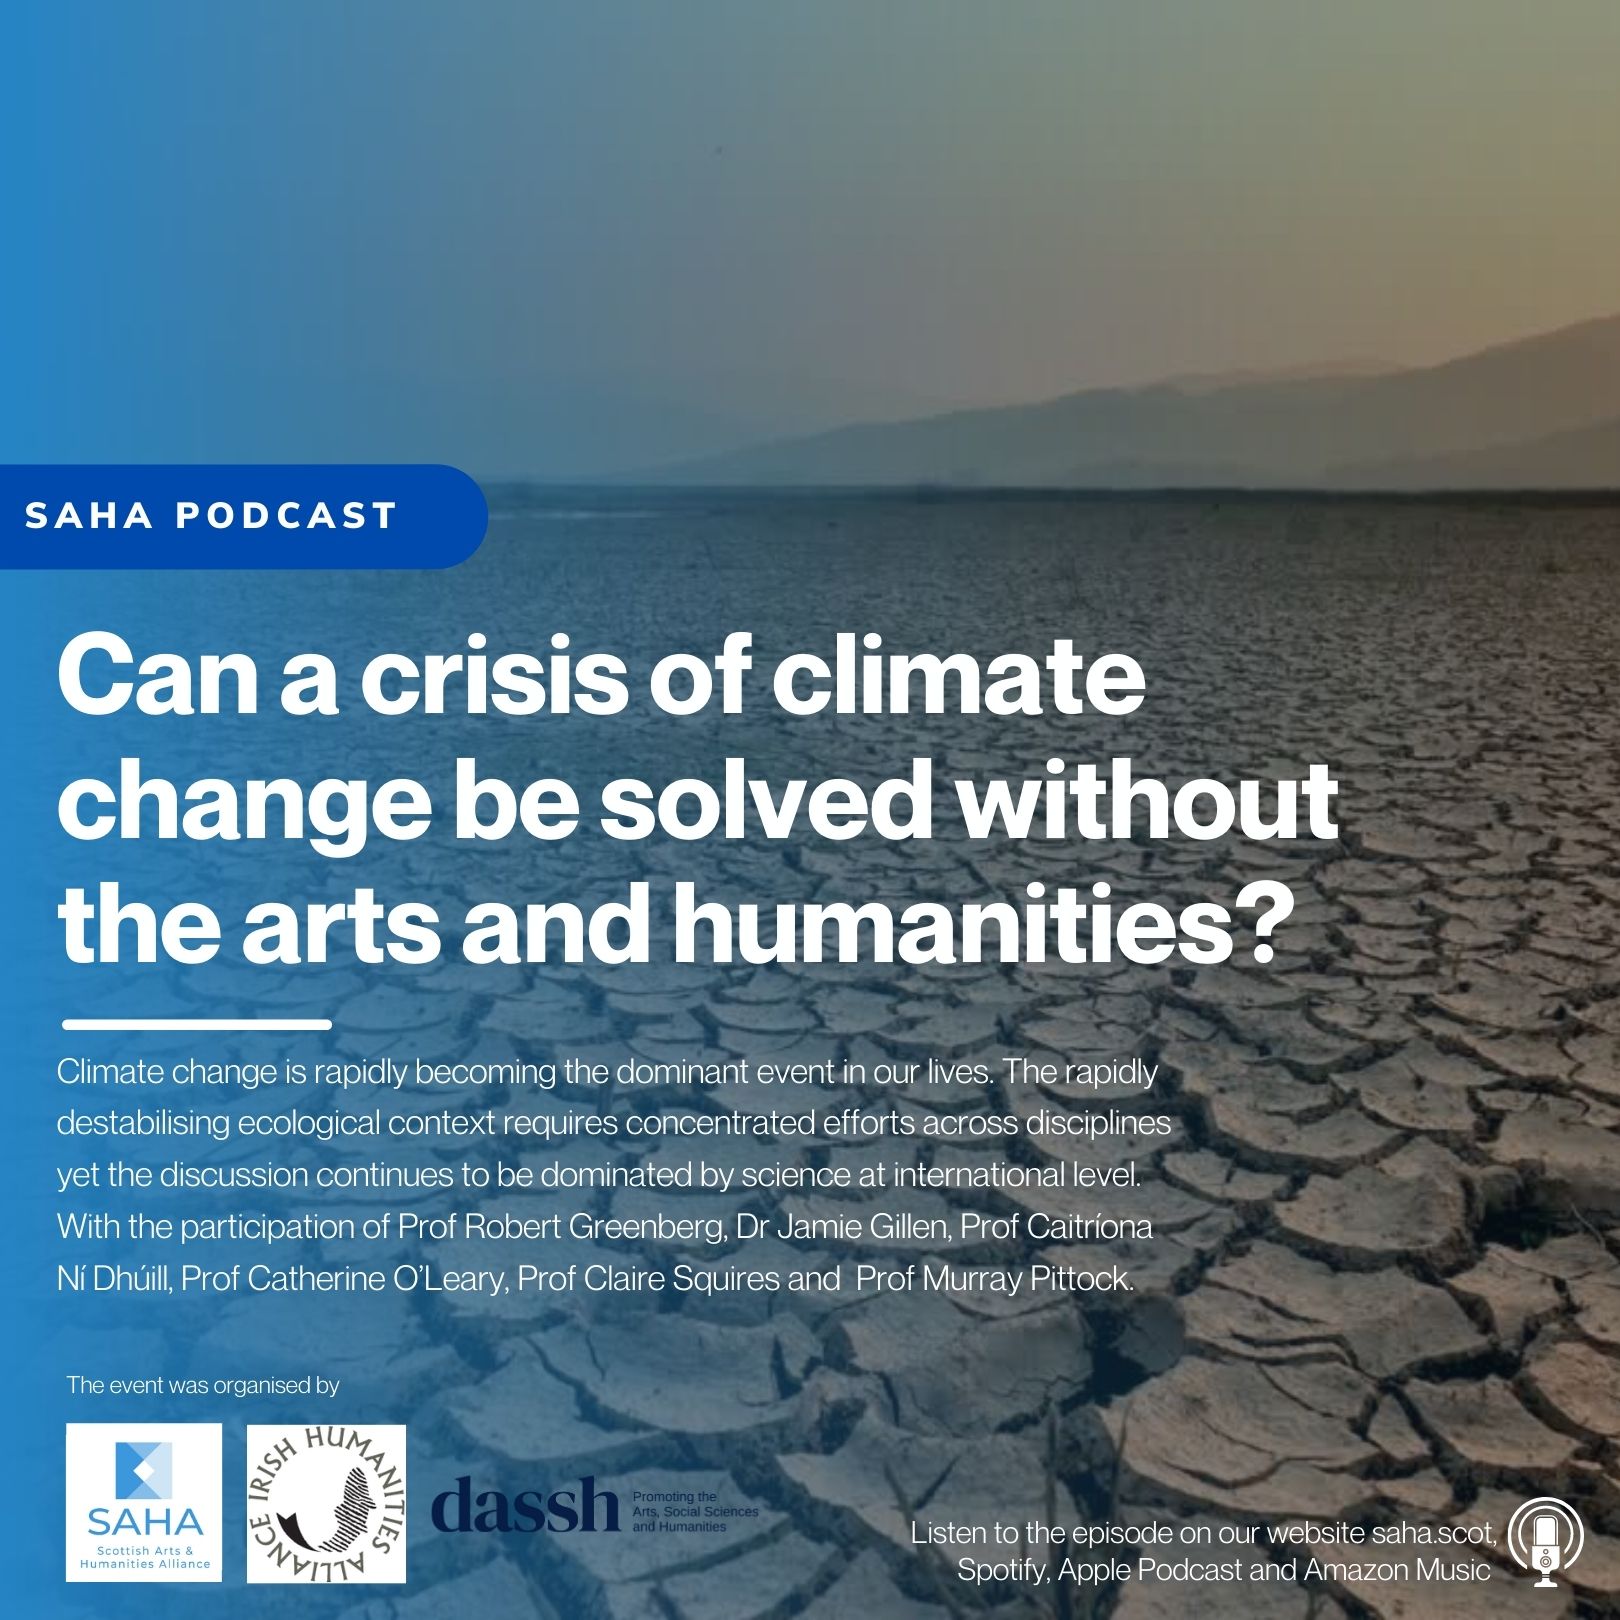 Can a crisis of climate change be solved without the arts and humanities?